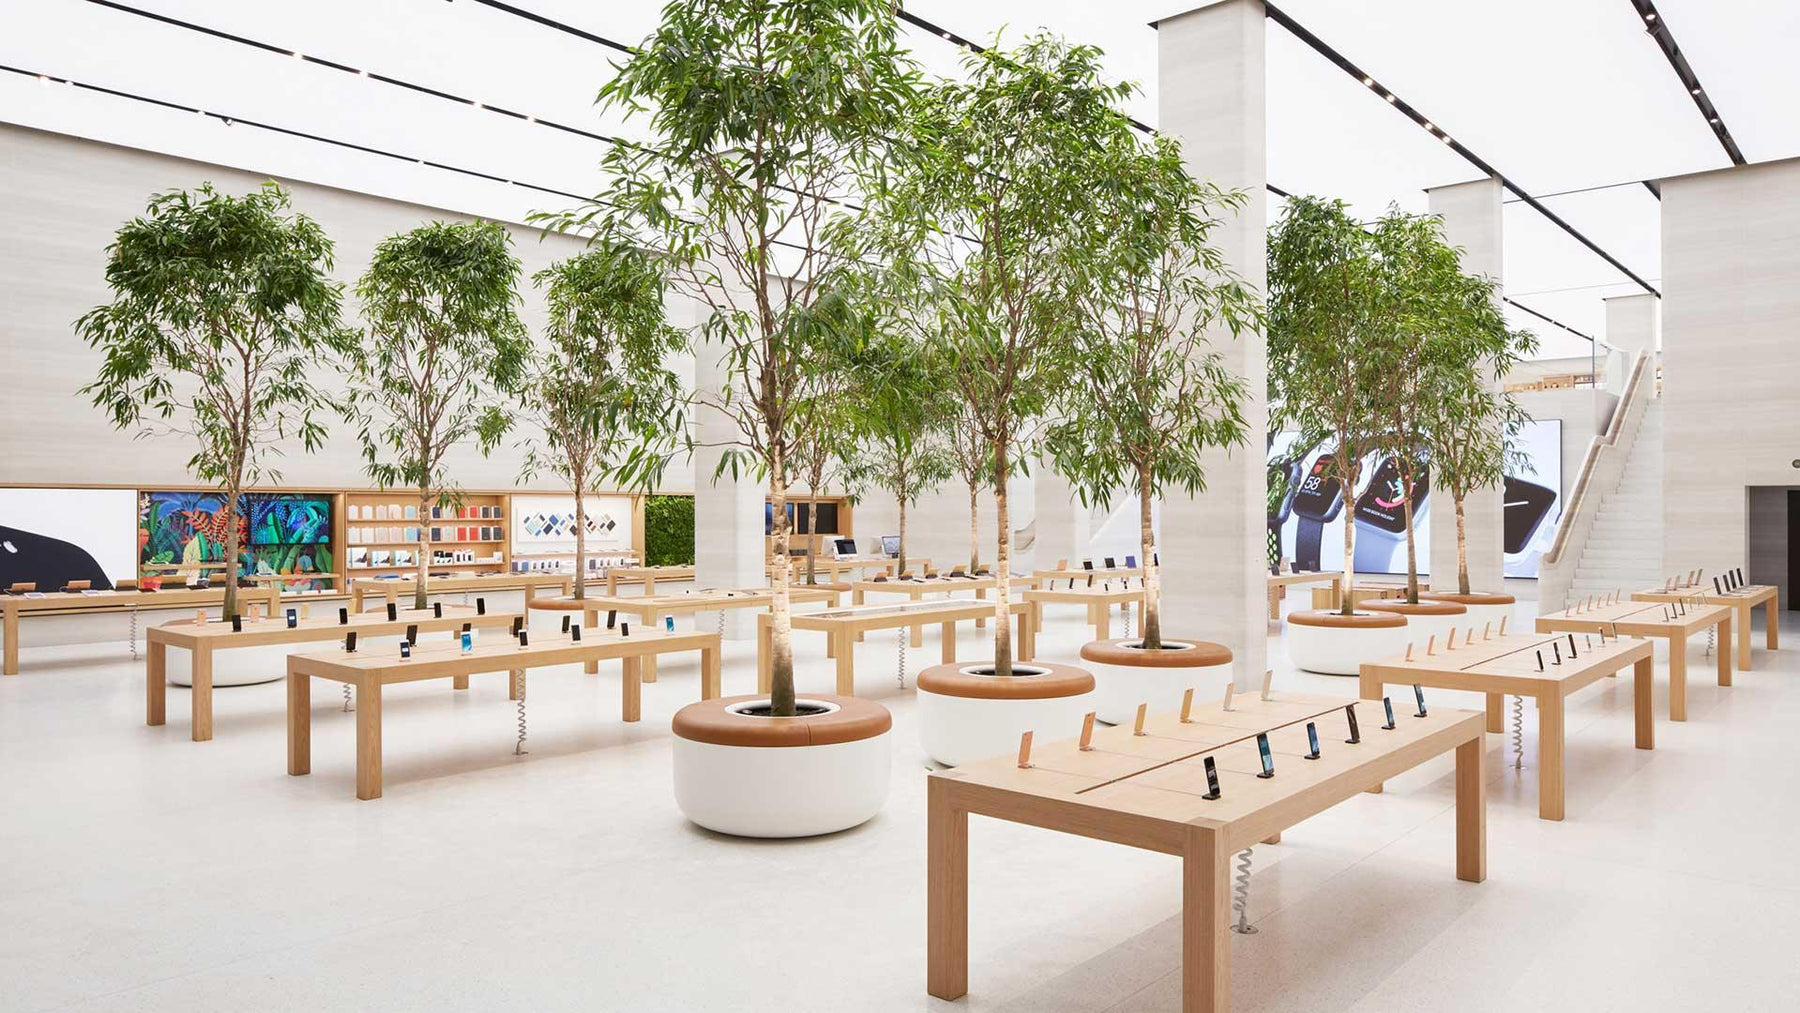 Apple unveils tree-filled Regent Street store by Foster + Partners - M2 Retail